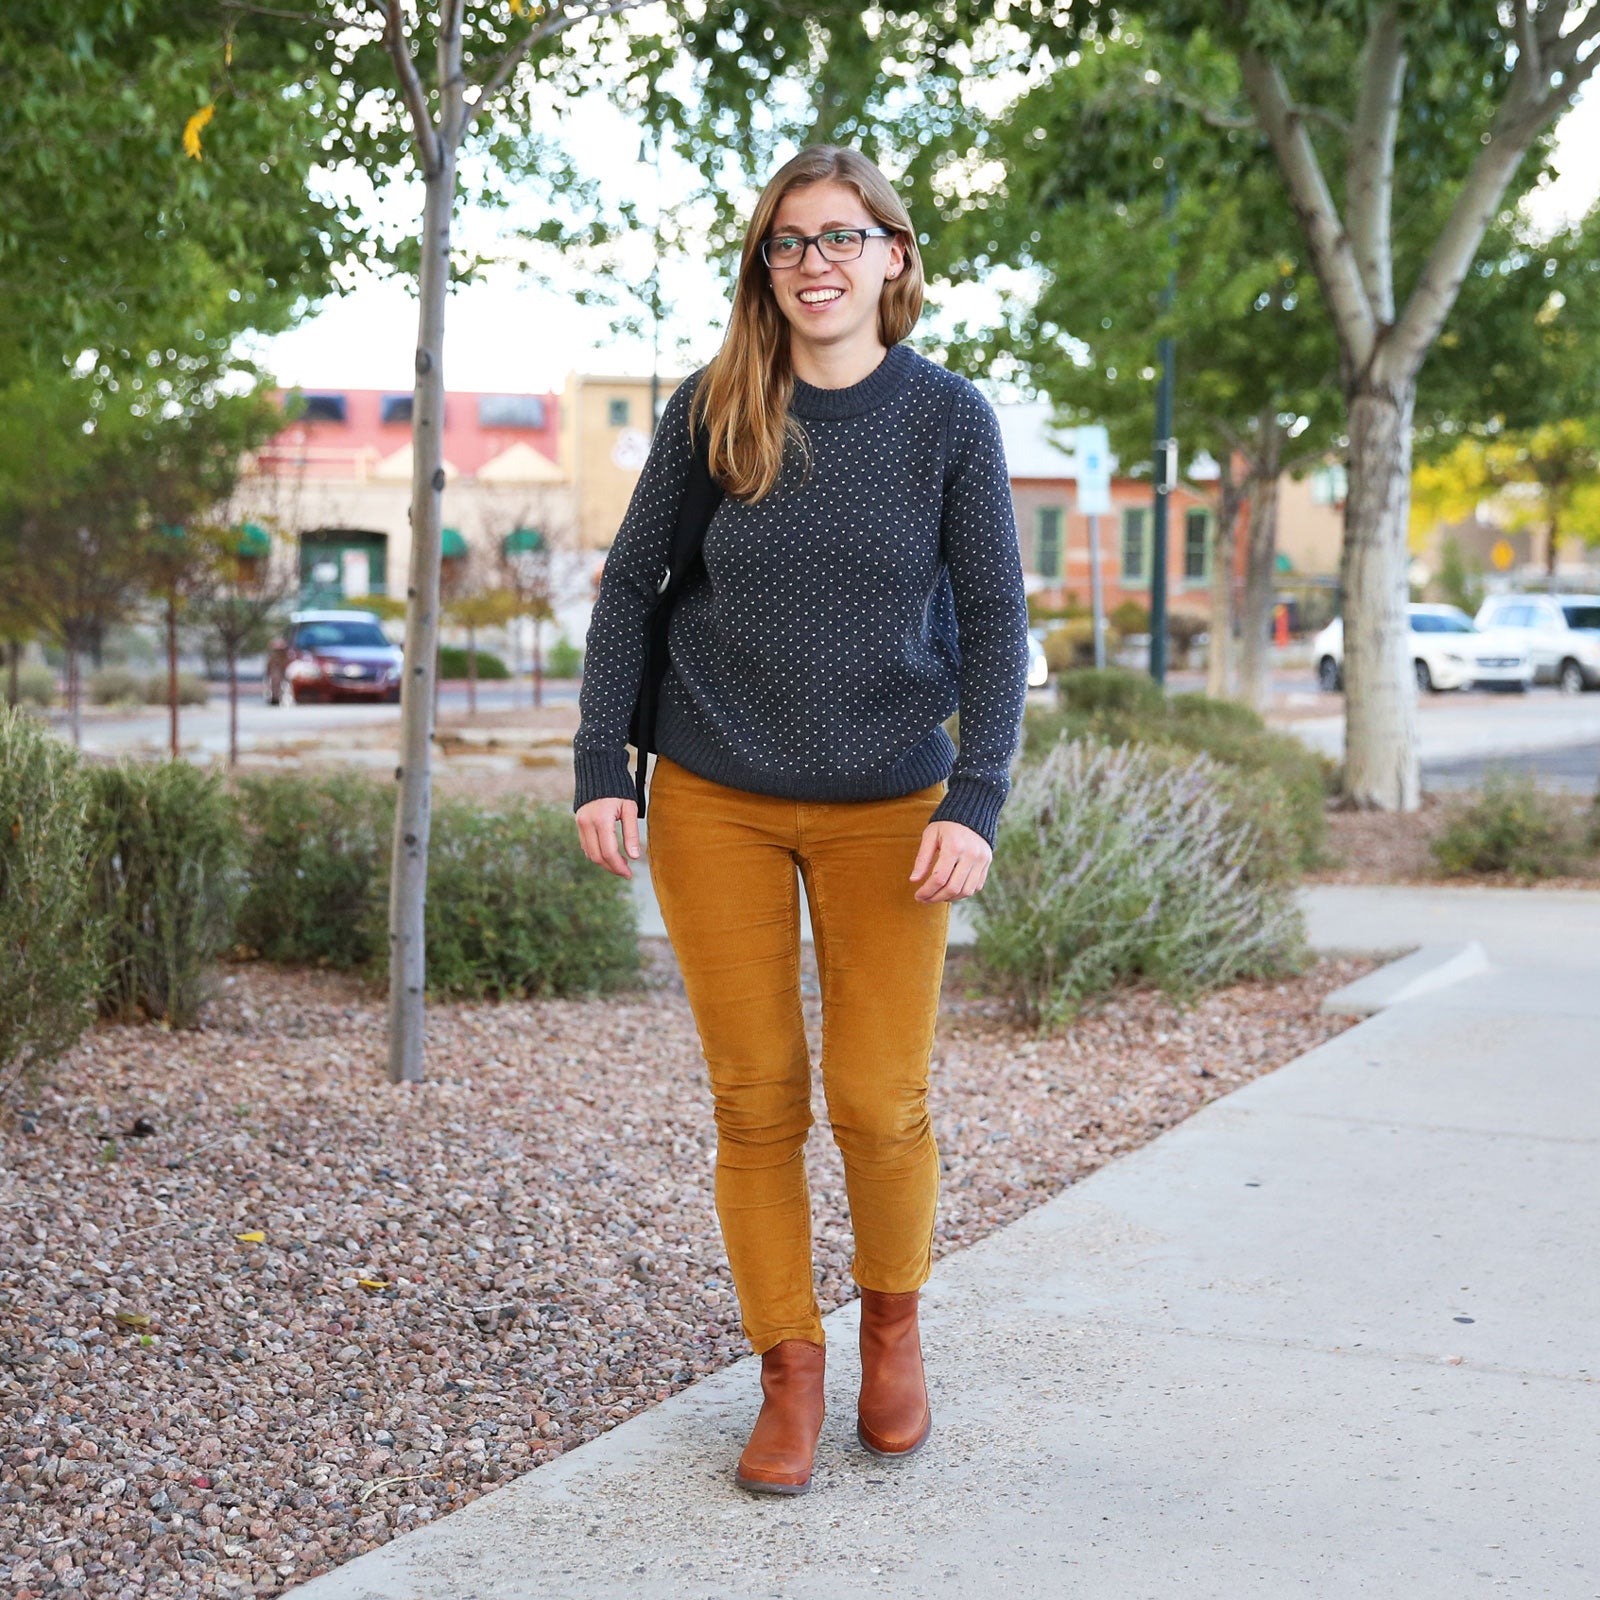 Our Gear Editor’s Go-To Fall Outfit